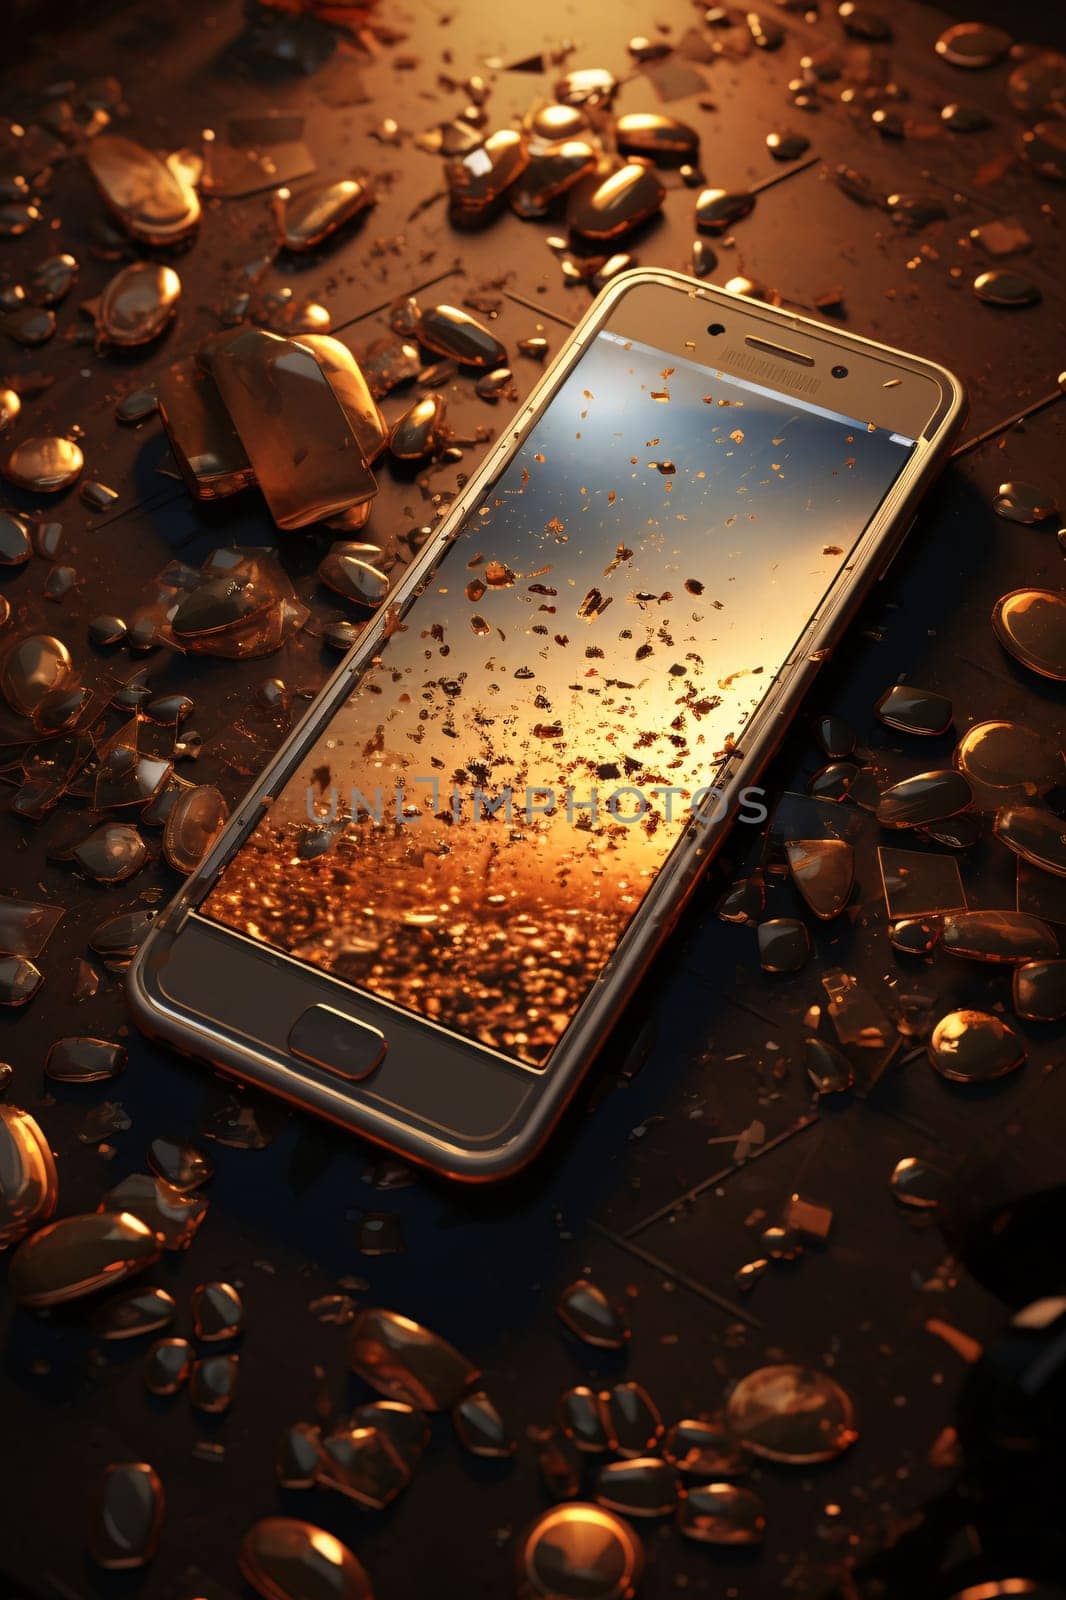 Broken mobile phone on the background of golden coins. 3d rendering by ThemesS